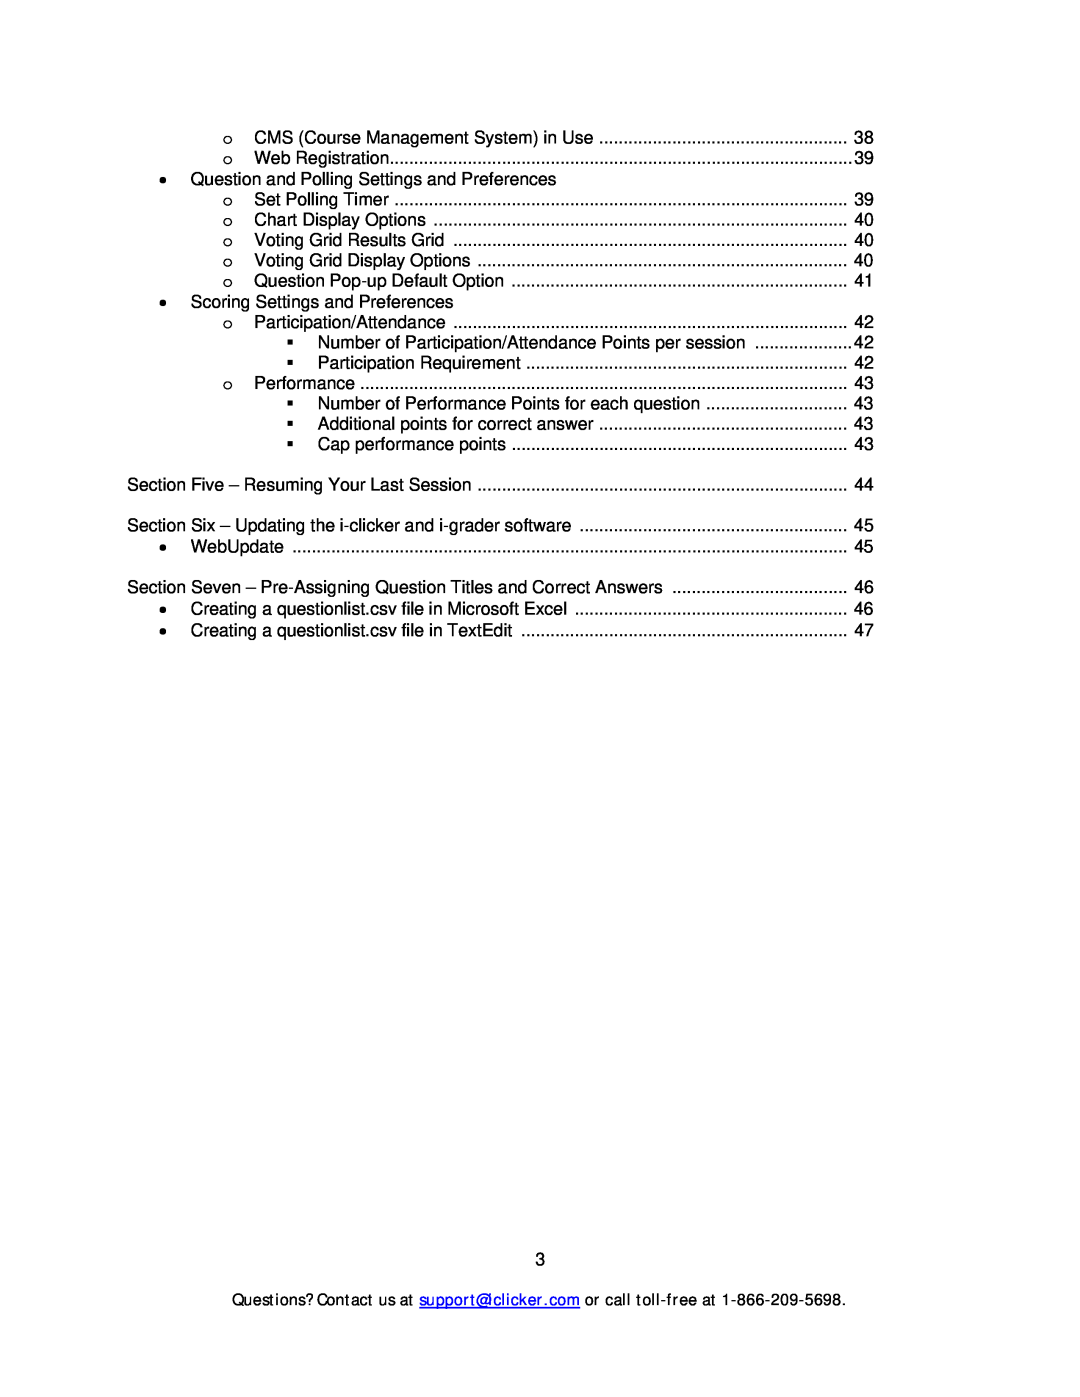 Apple Mouse manual Question and Polling Settings and Preferences 